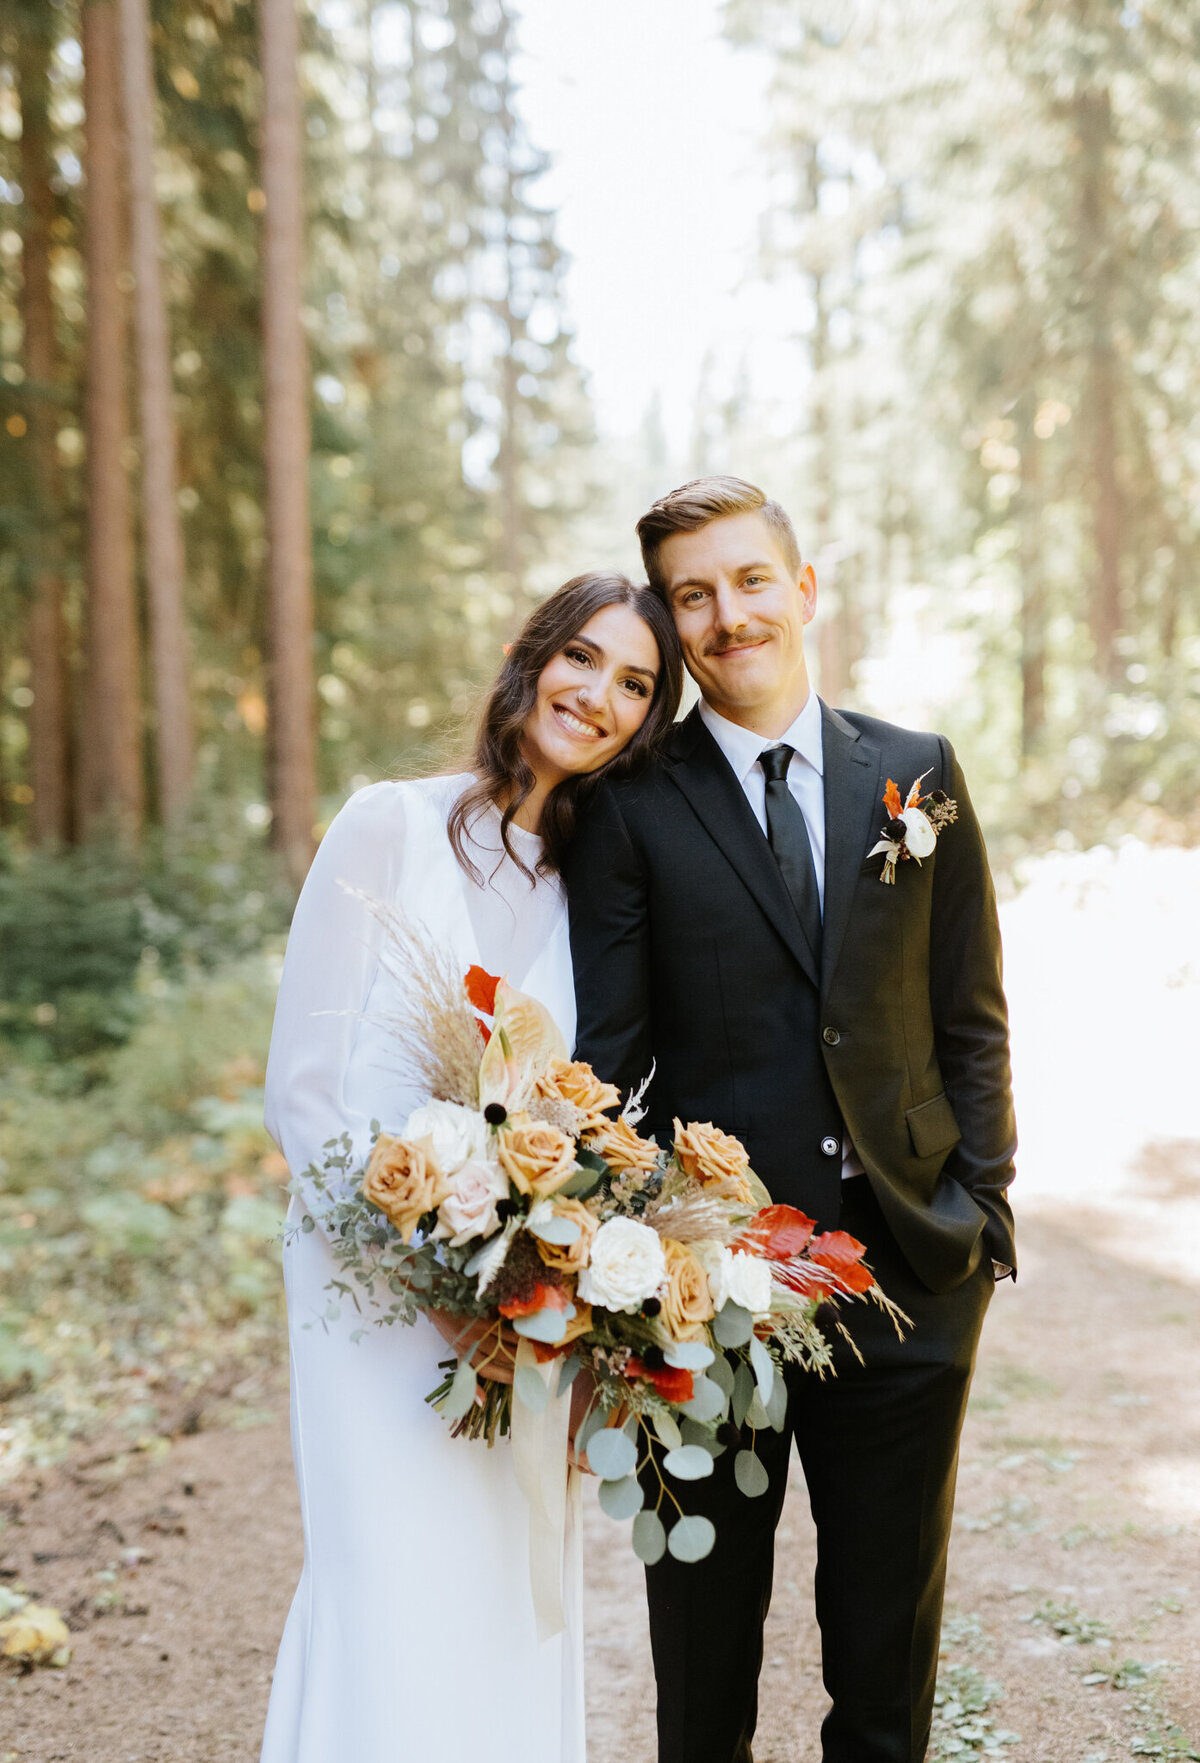 Beautiful Fall inspired bridal bouquet by The Romantiks, romantic wedding florals based in Calgary, AB & Cranbrook, BC. Featured on the Brontë Bride Vendor Guide.